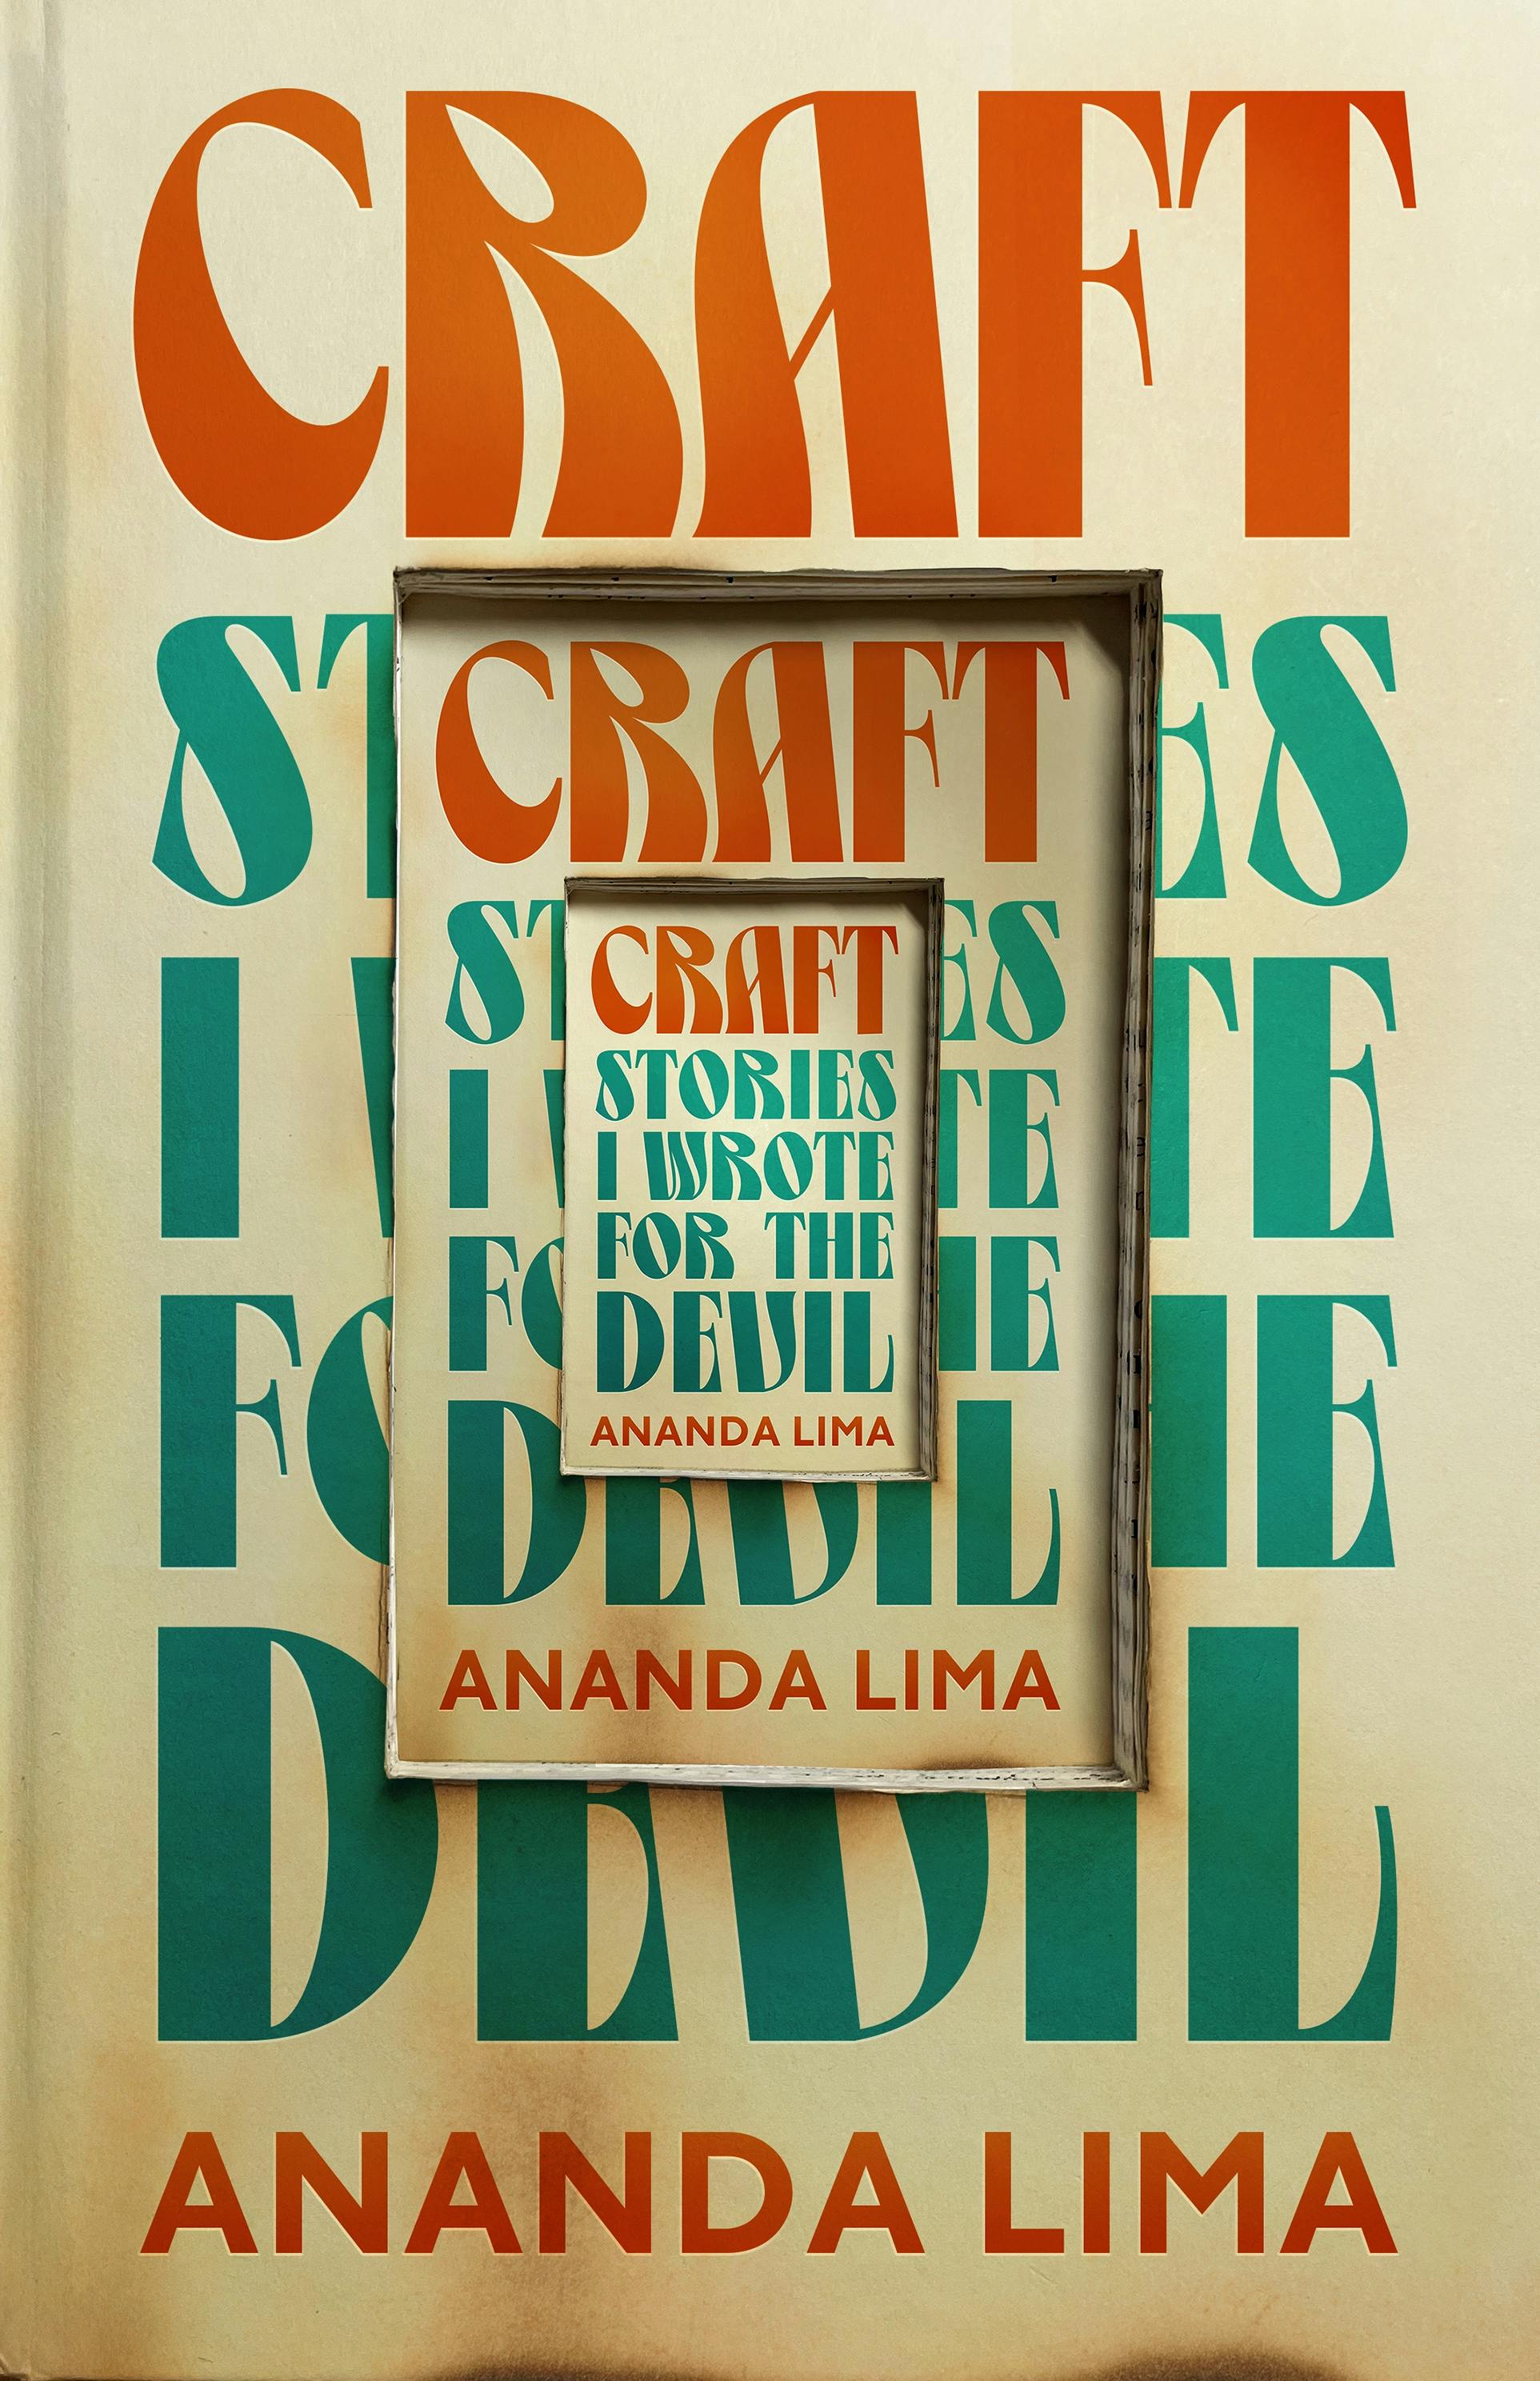 Cover for the book titled as: Craft